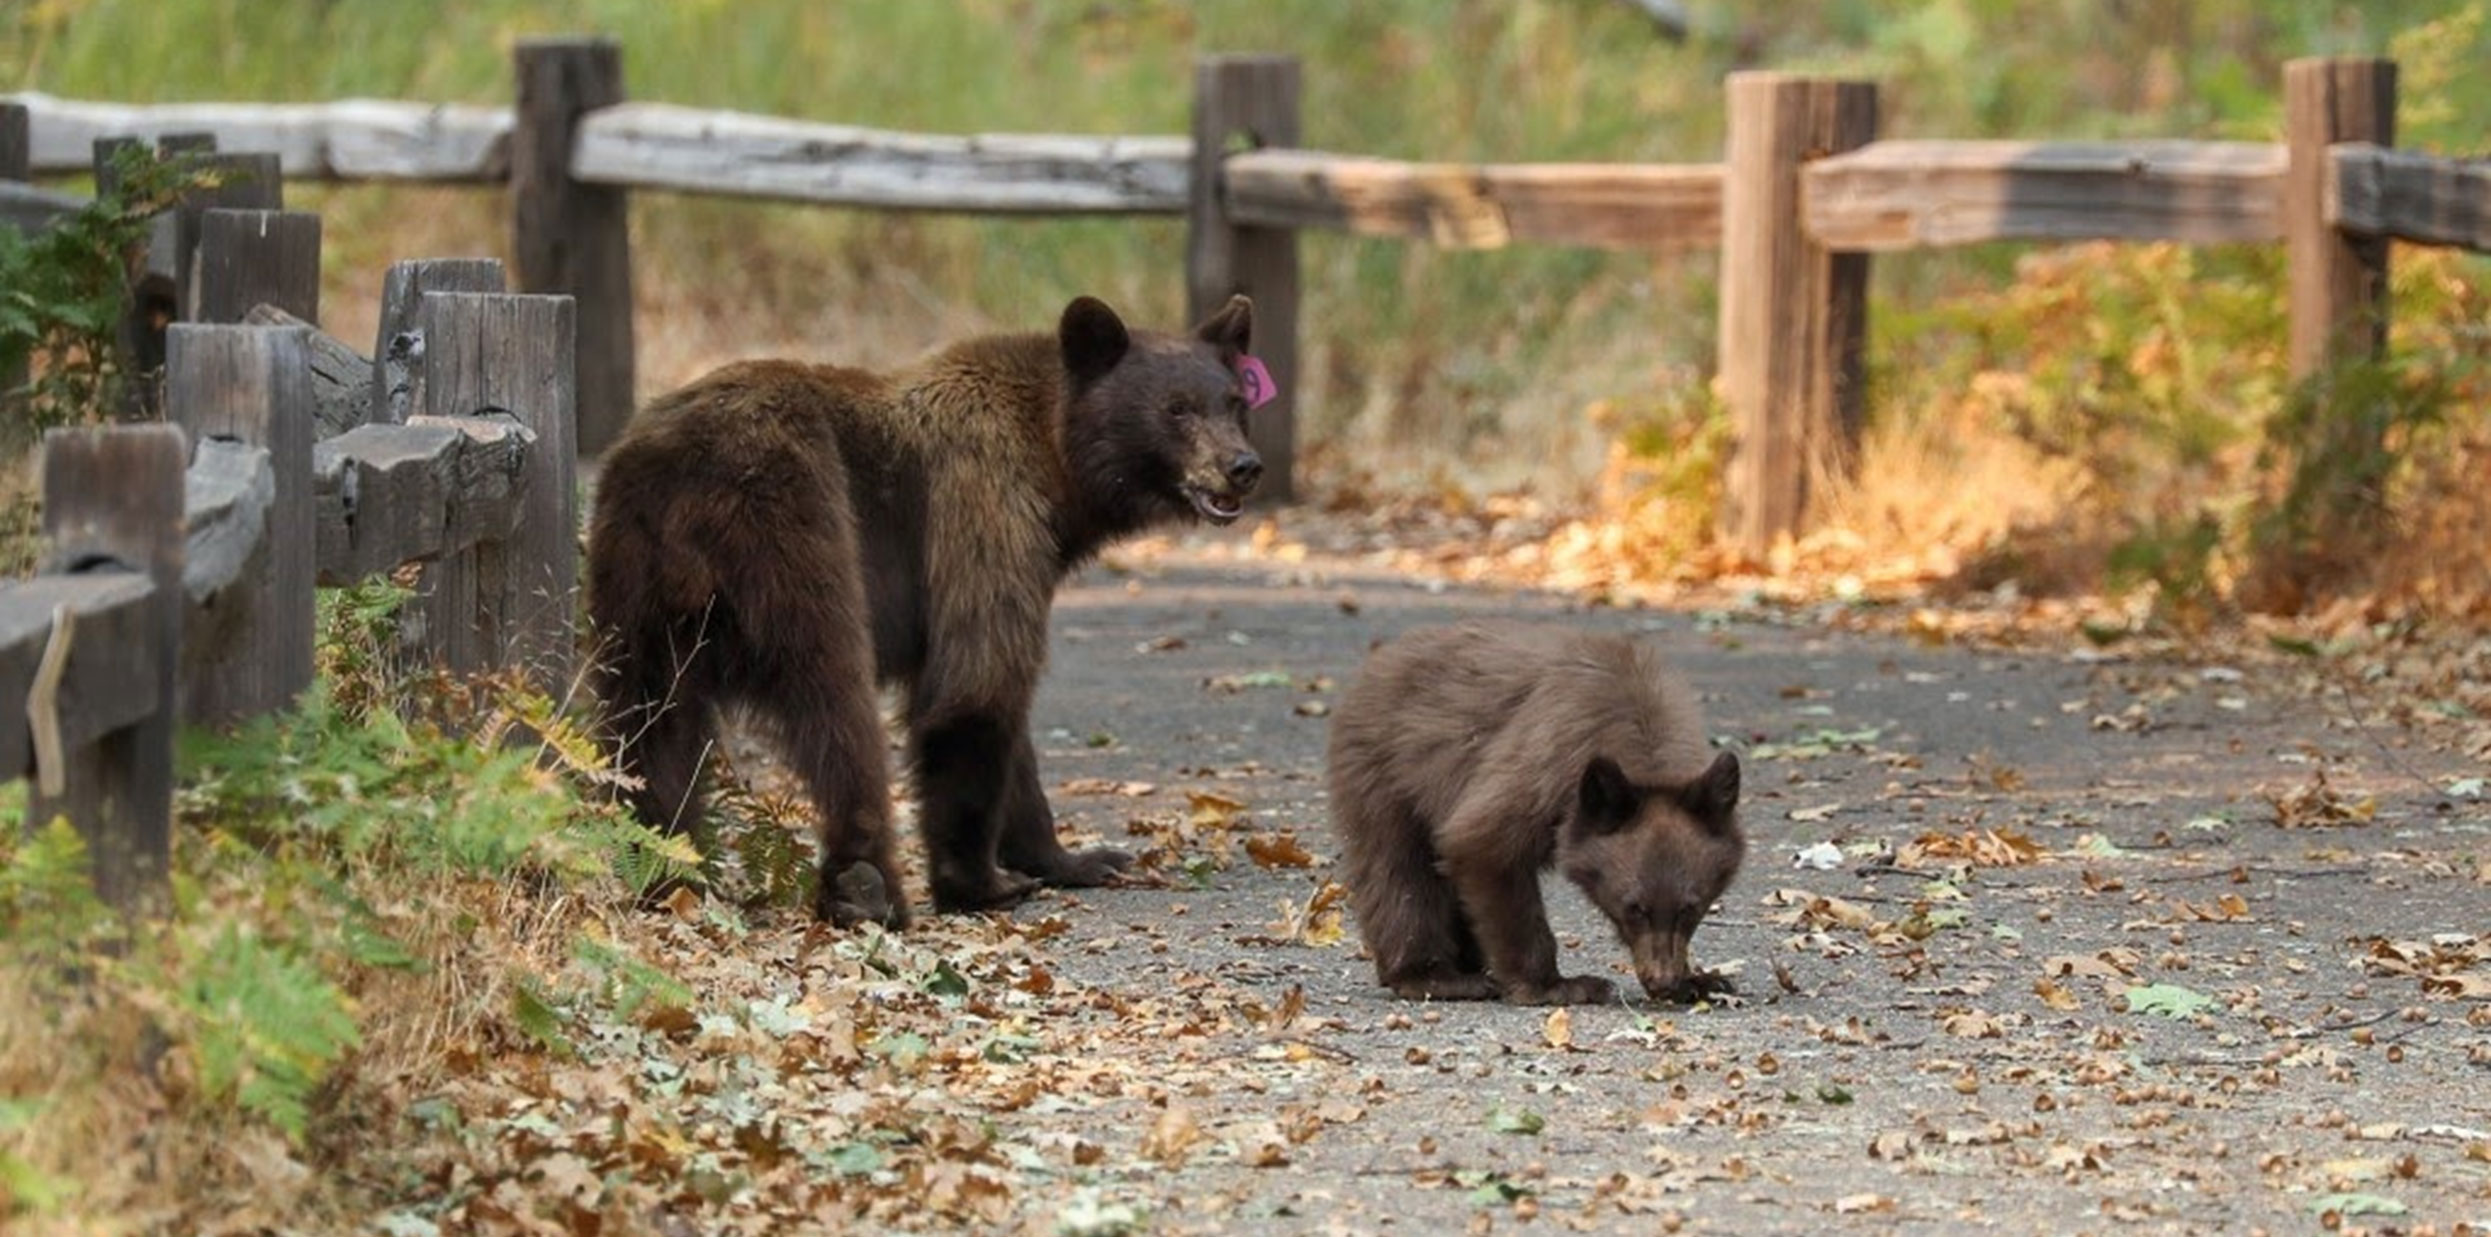 Black bear sow and cub on a bike path. The sow has a purple tag in the left ear. The cub is sniffing the ground.